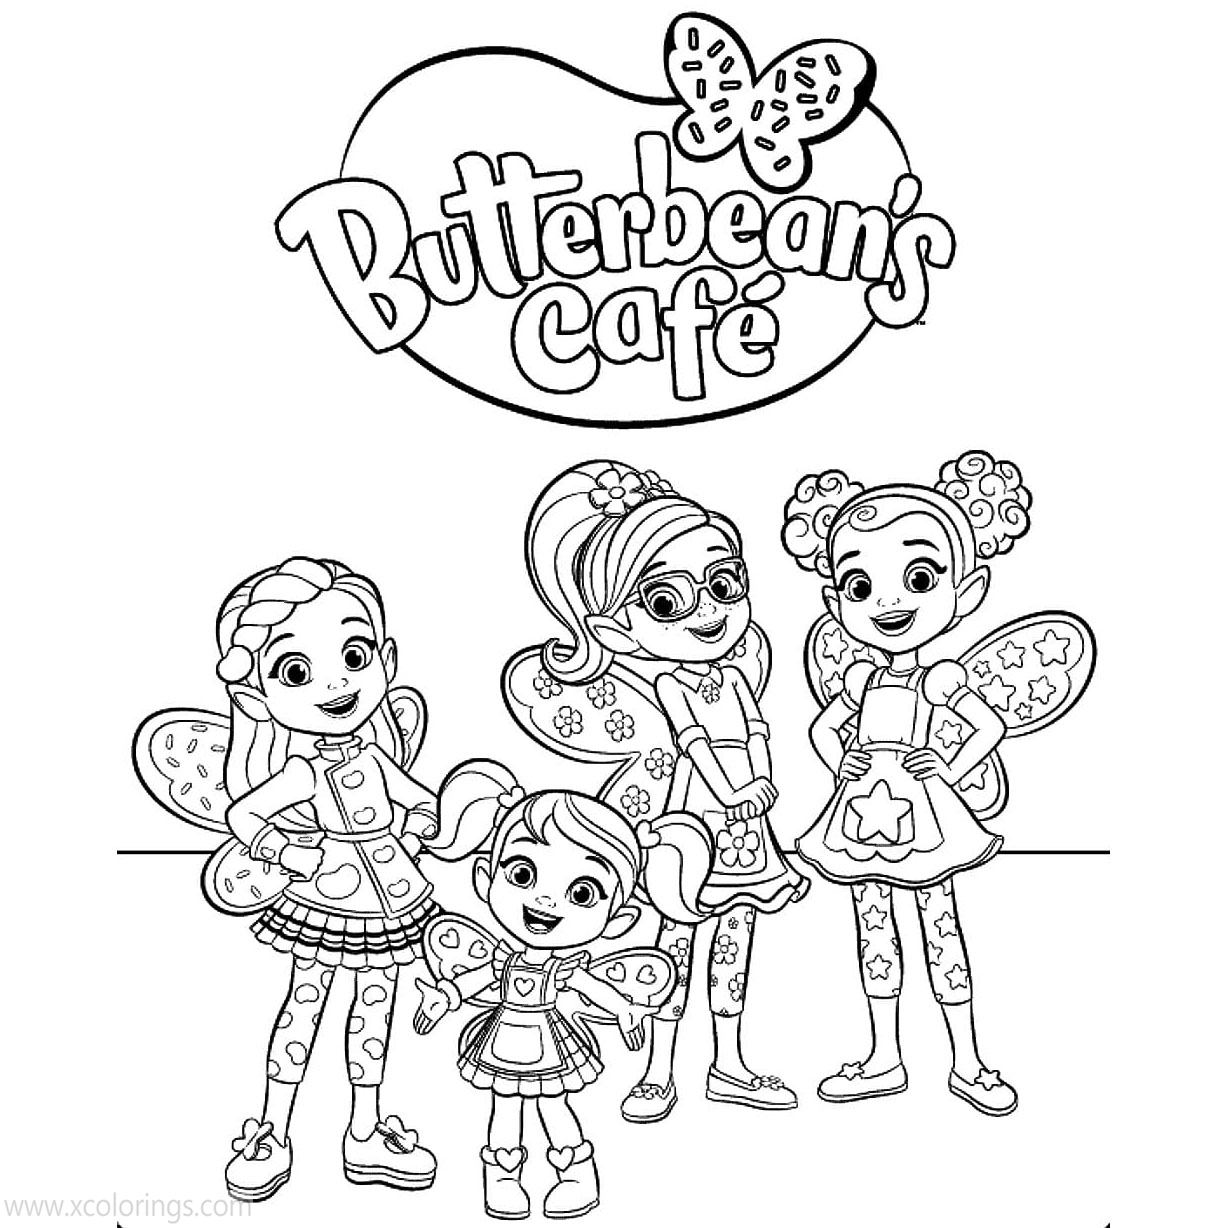 Free Butterbean's Cafe Coloring Pages Fairies printable